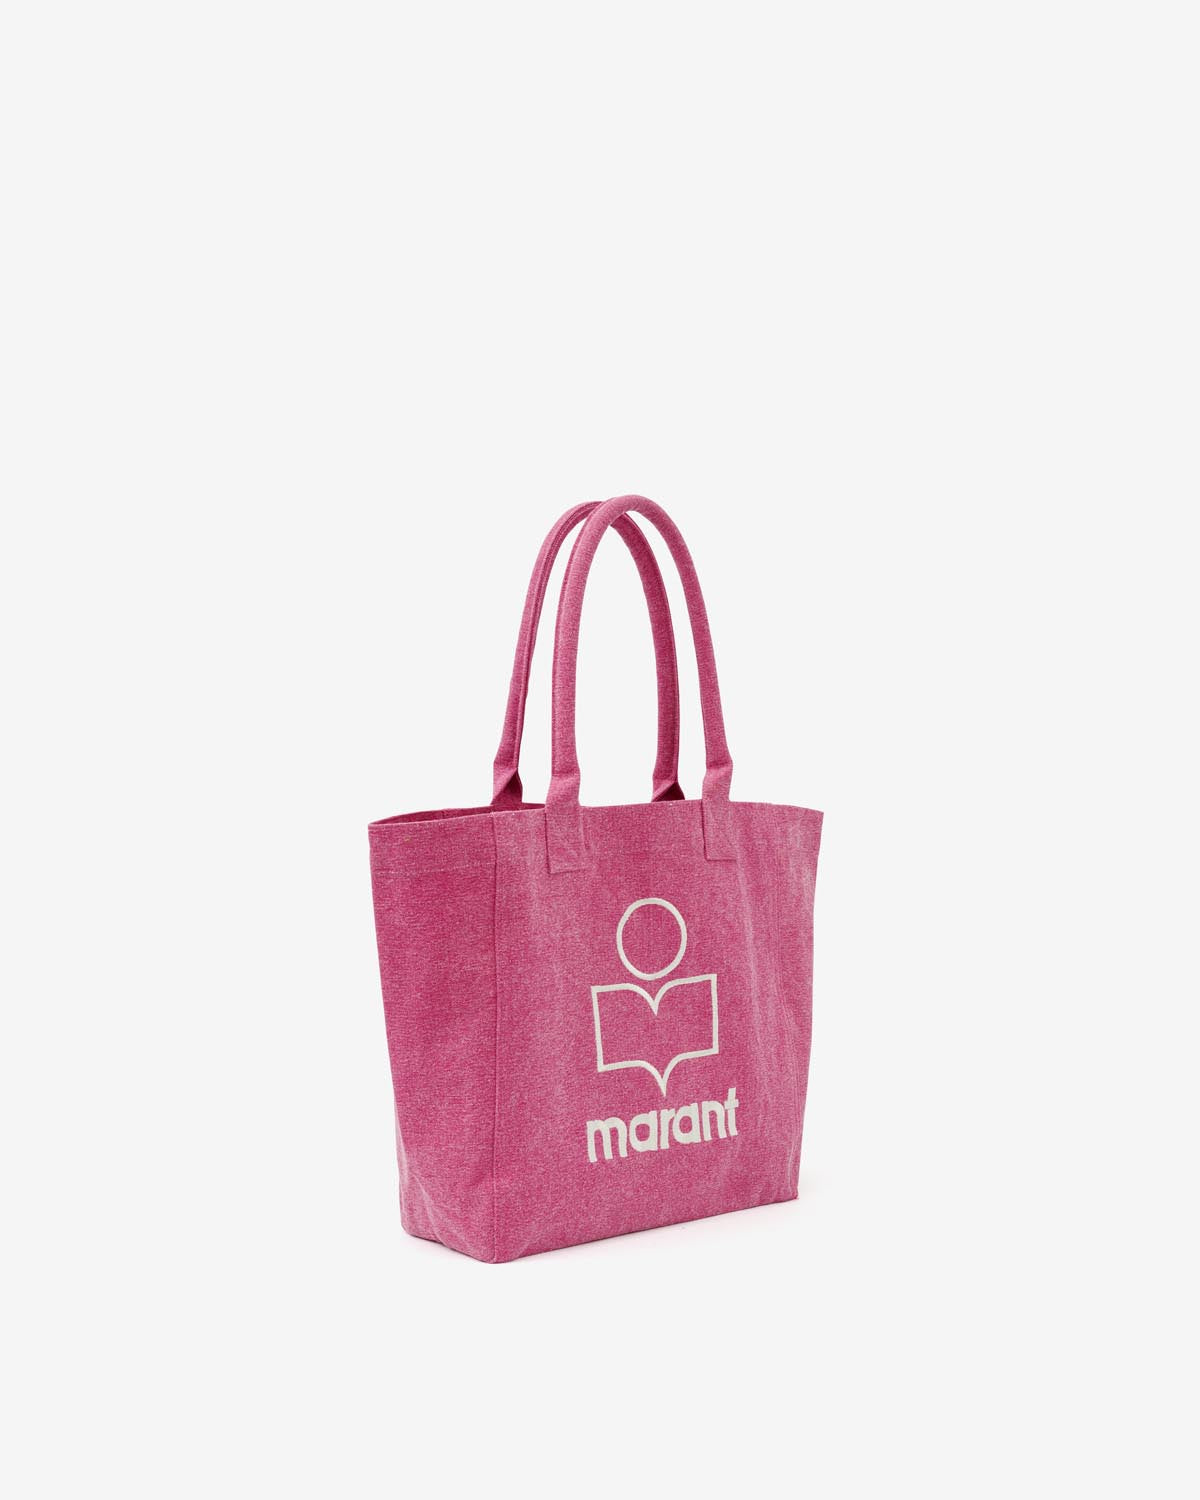 Tote bag yenky small Woman Rosa 1